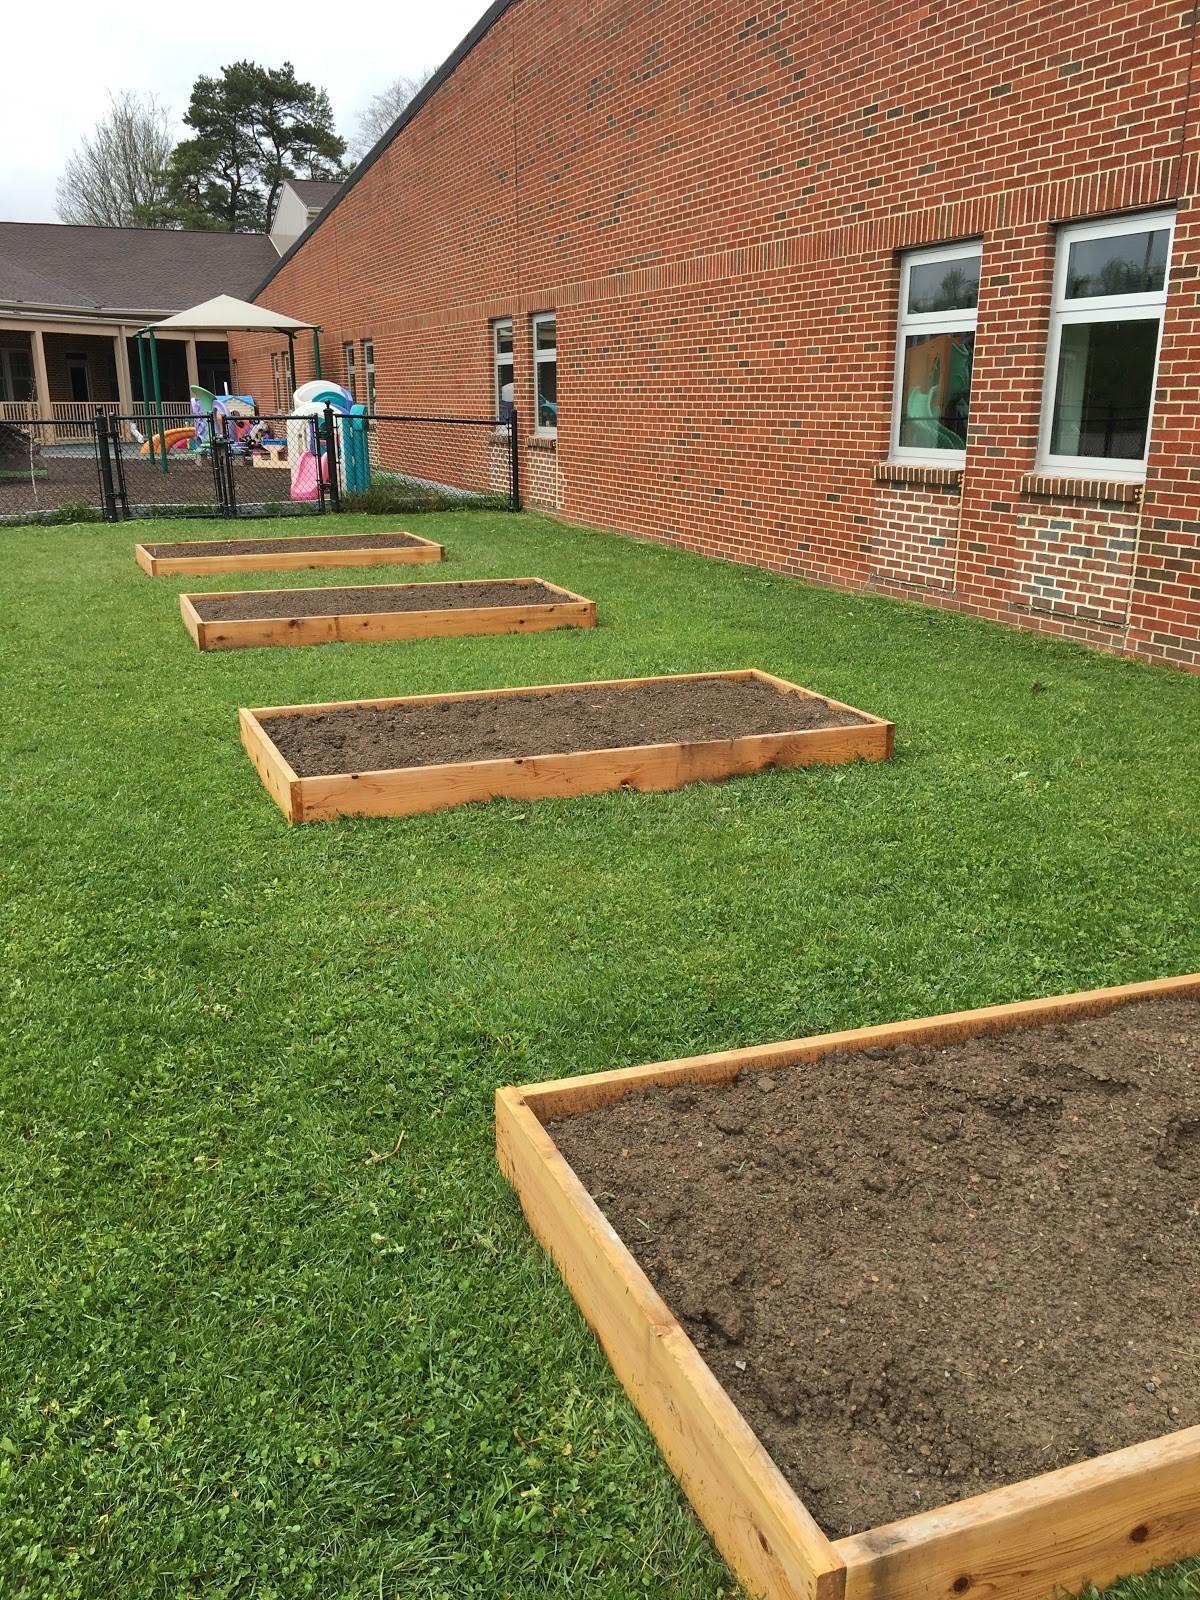 Working with raised beds can help protect students from elevated soil lead levels.